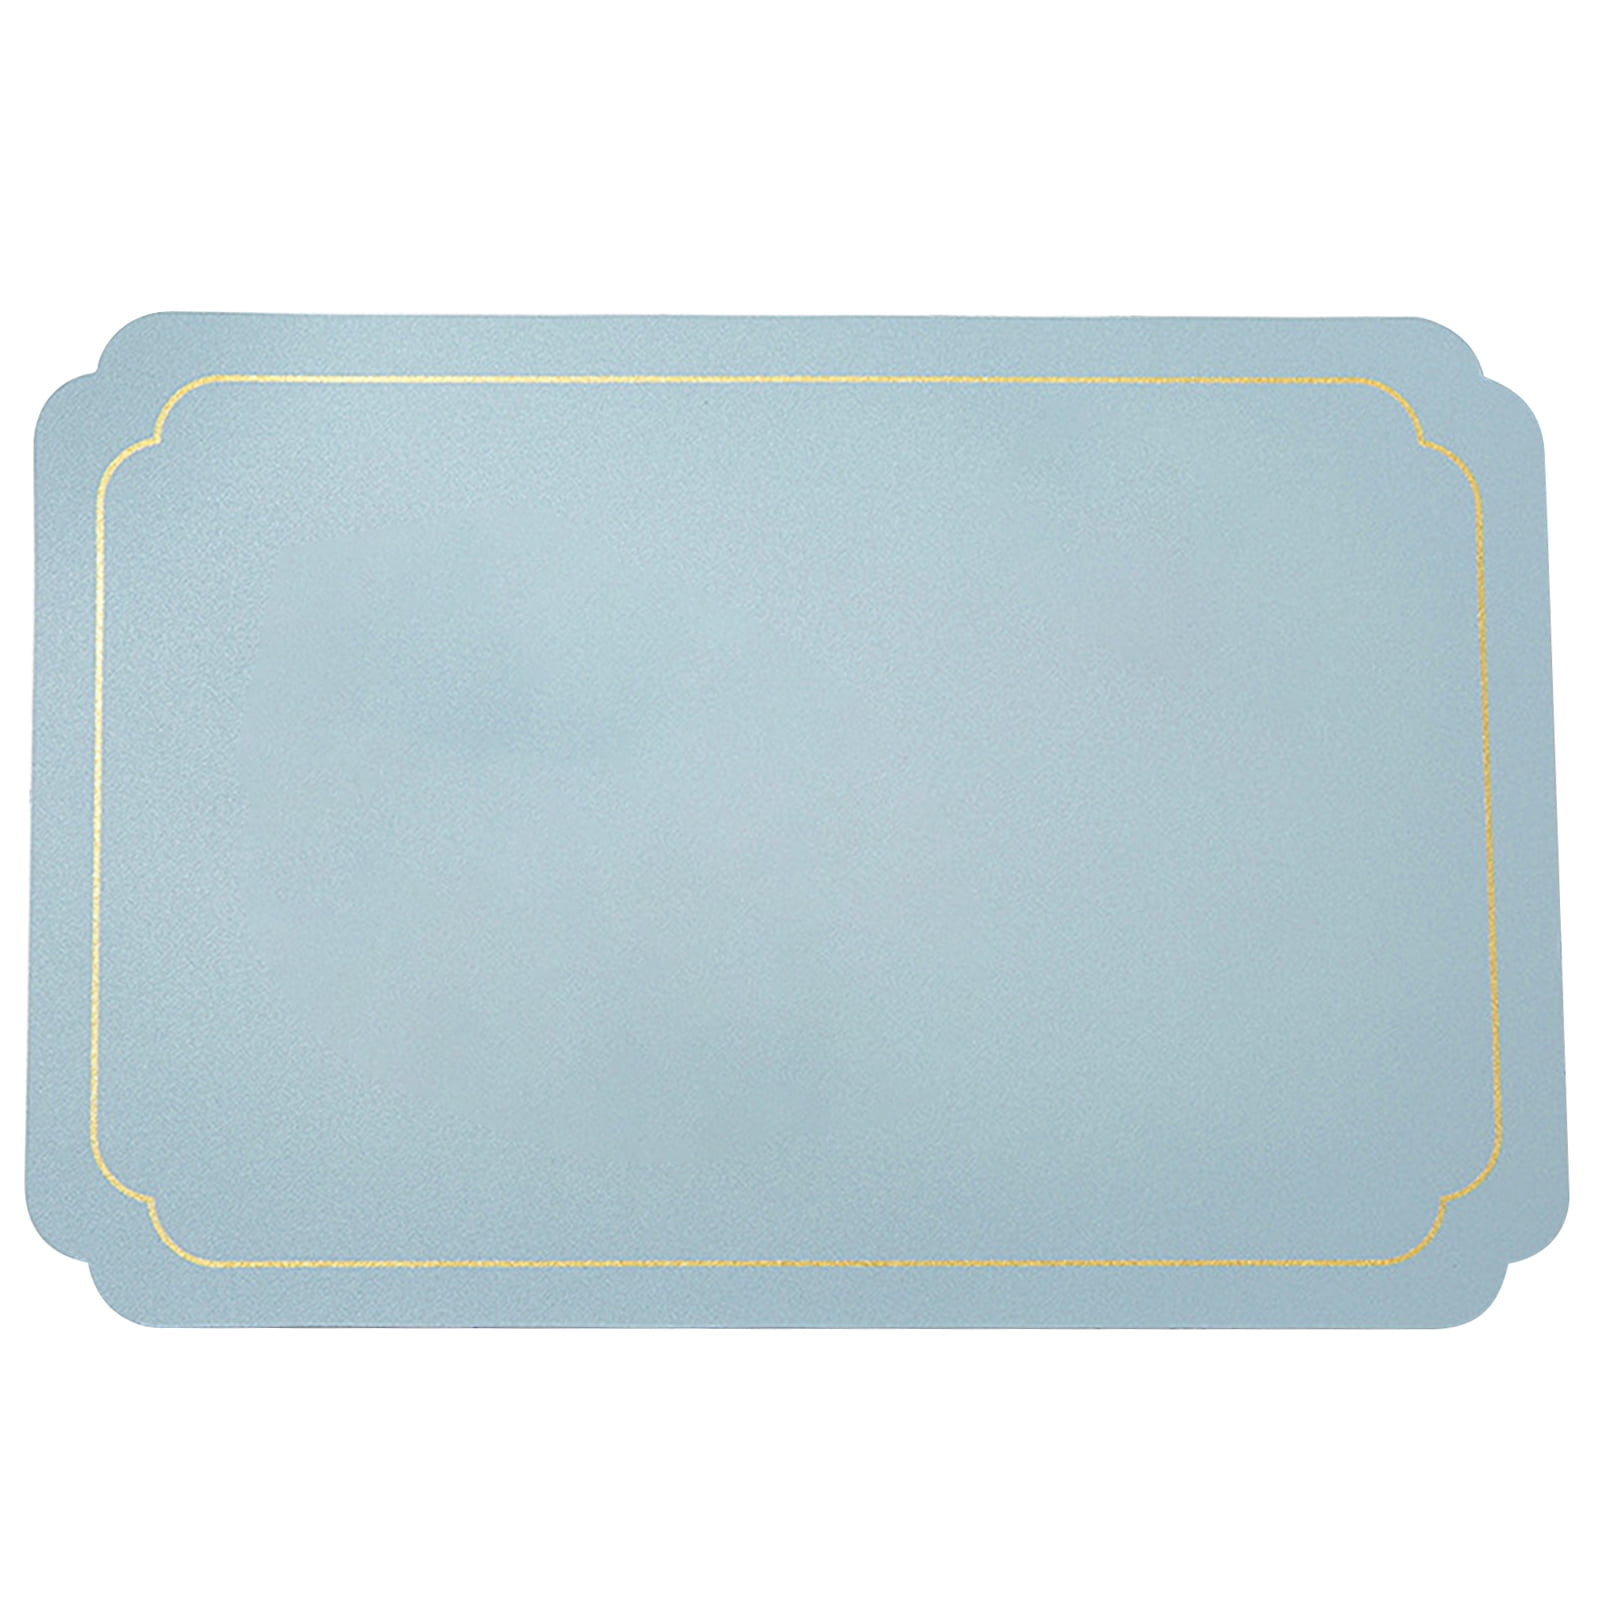 CraftTex, Ultimate Craft Table Protector Mat, Super-Strong Clear  Polycarbonate, Size 29 x 59